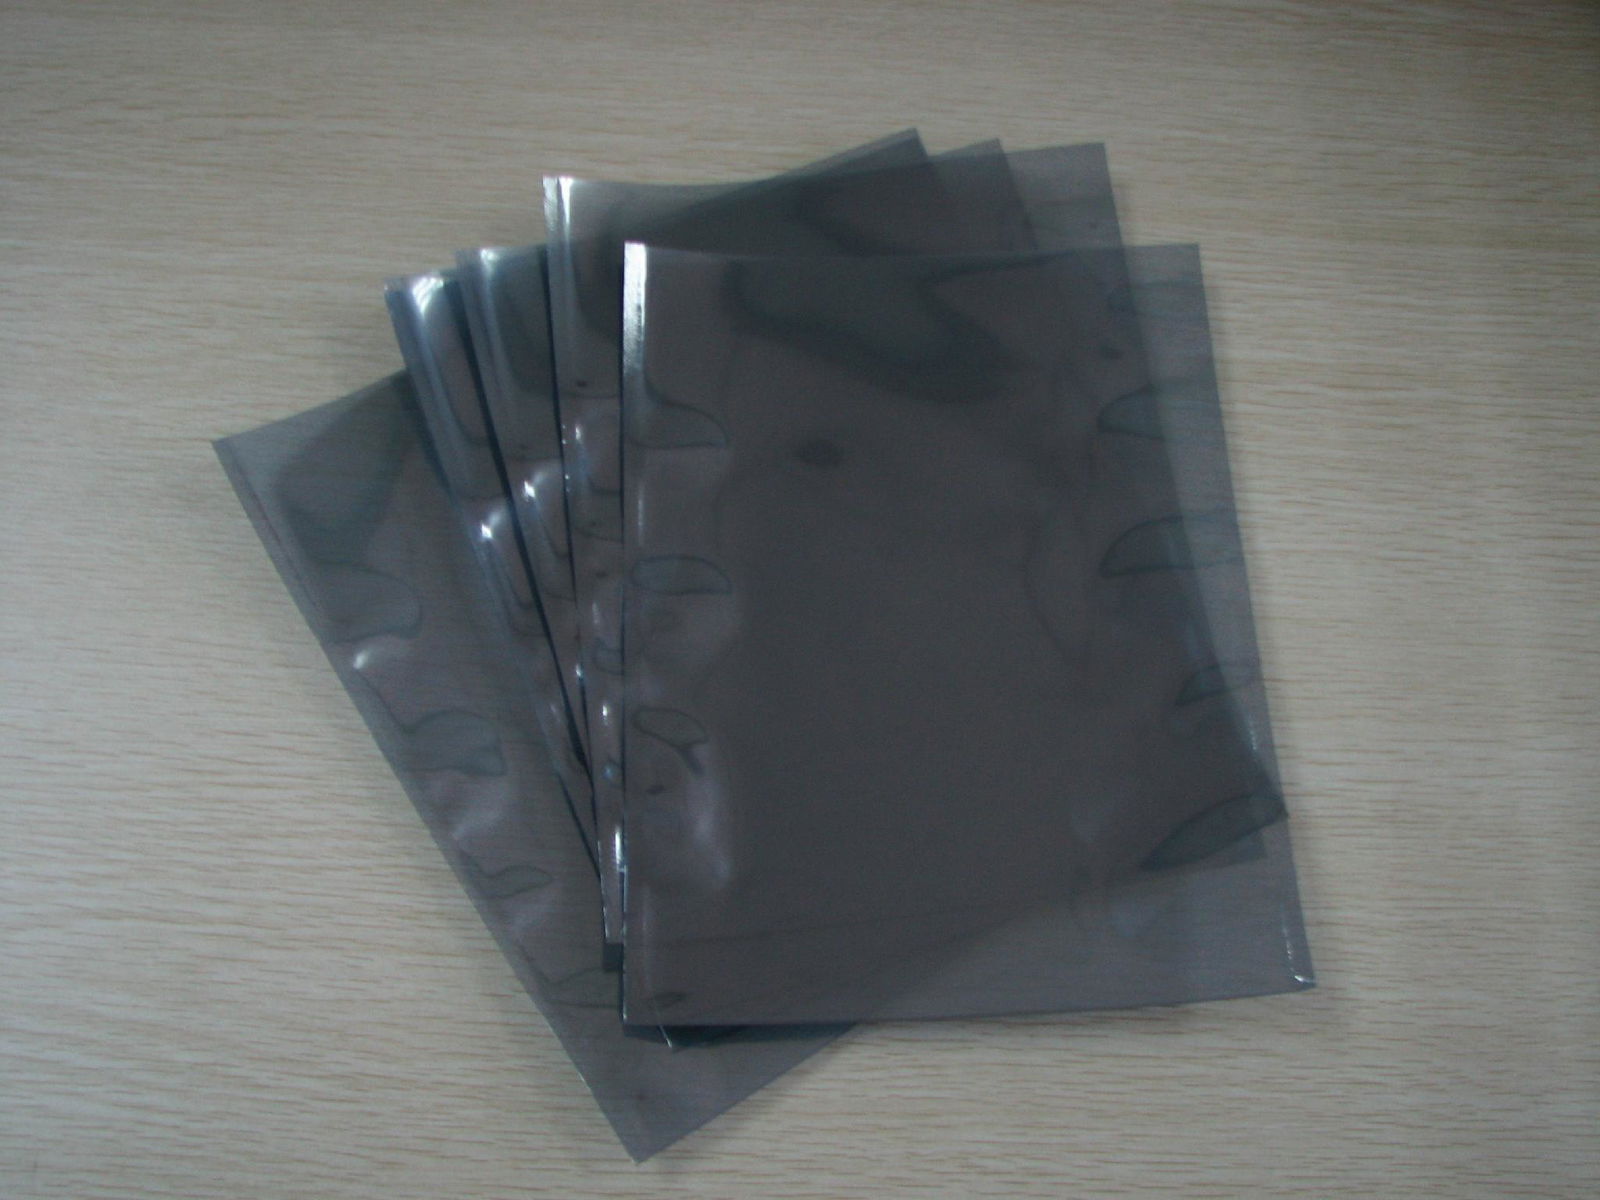 Antistatic Bag for Electronic Items 2